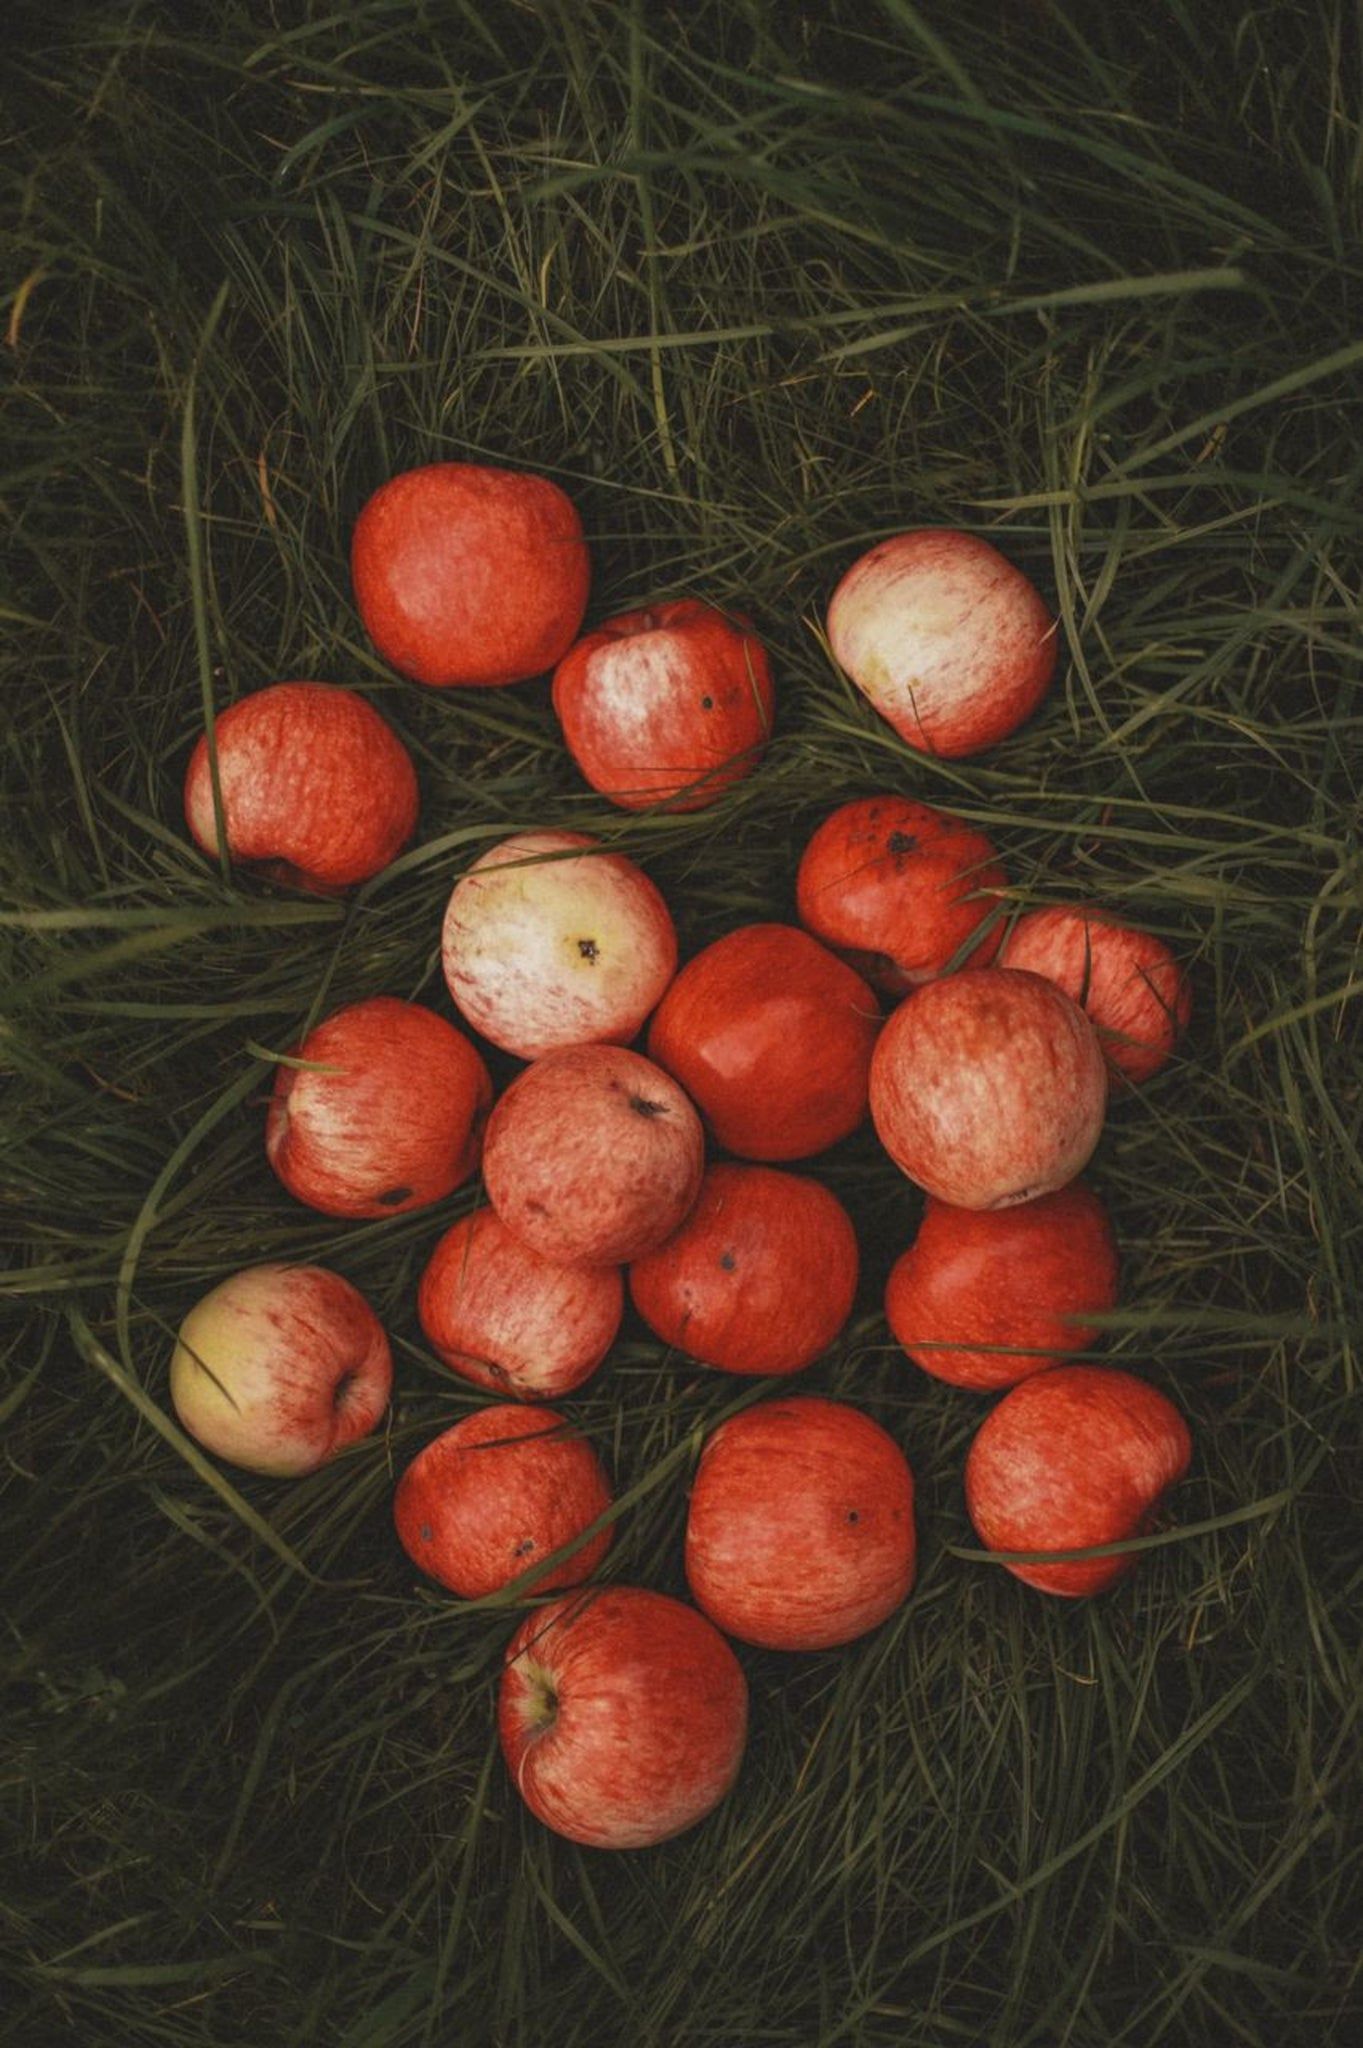 A bunch of apples laying in the grass - Fall, cozy, fall iPhone